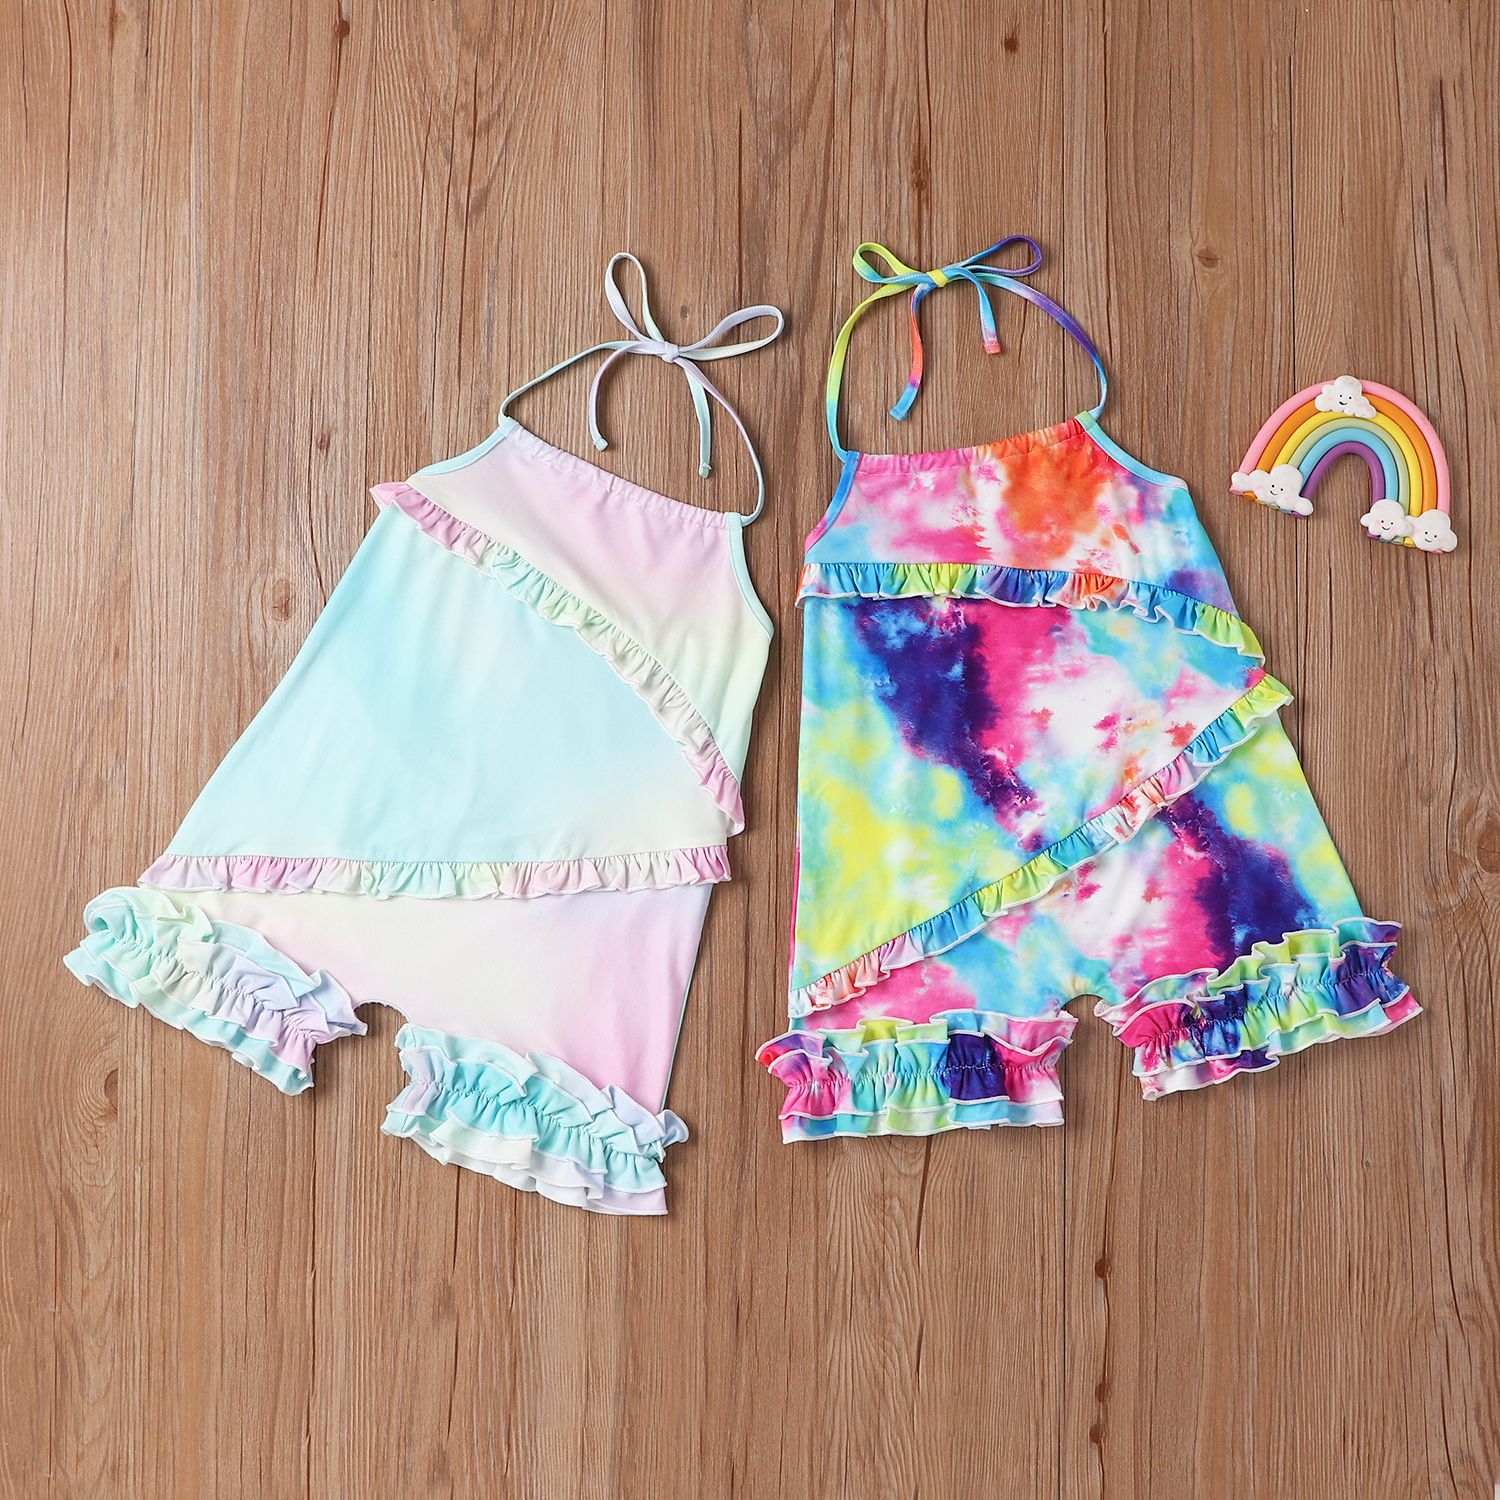 Striped-Rainbow-Princess-Romper-Baby-Kids-Girls-Clothes-Summer-Sleeveless-Ruffle-Pleated-Halter-Rompers-Fashion-Short-2